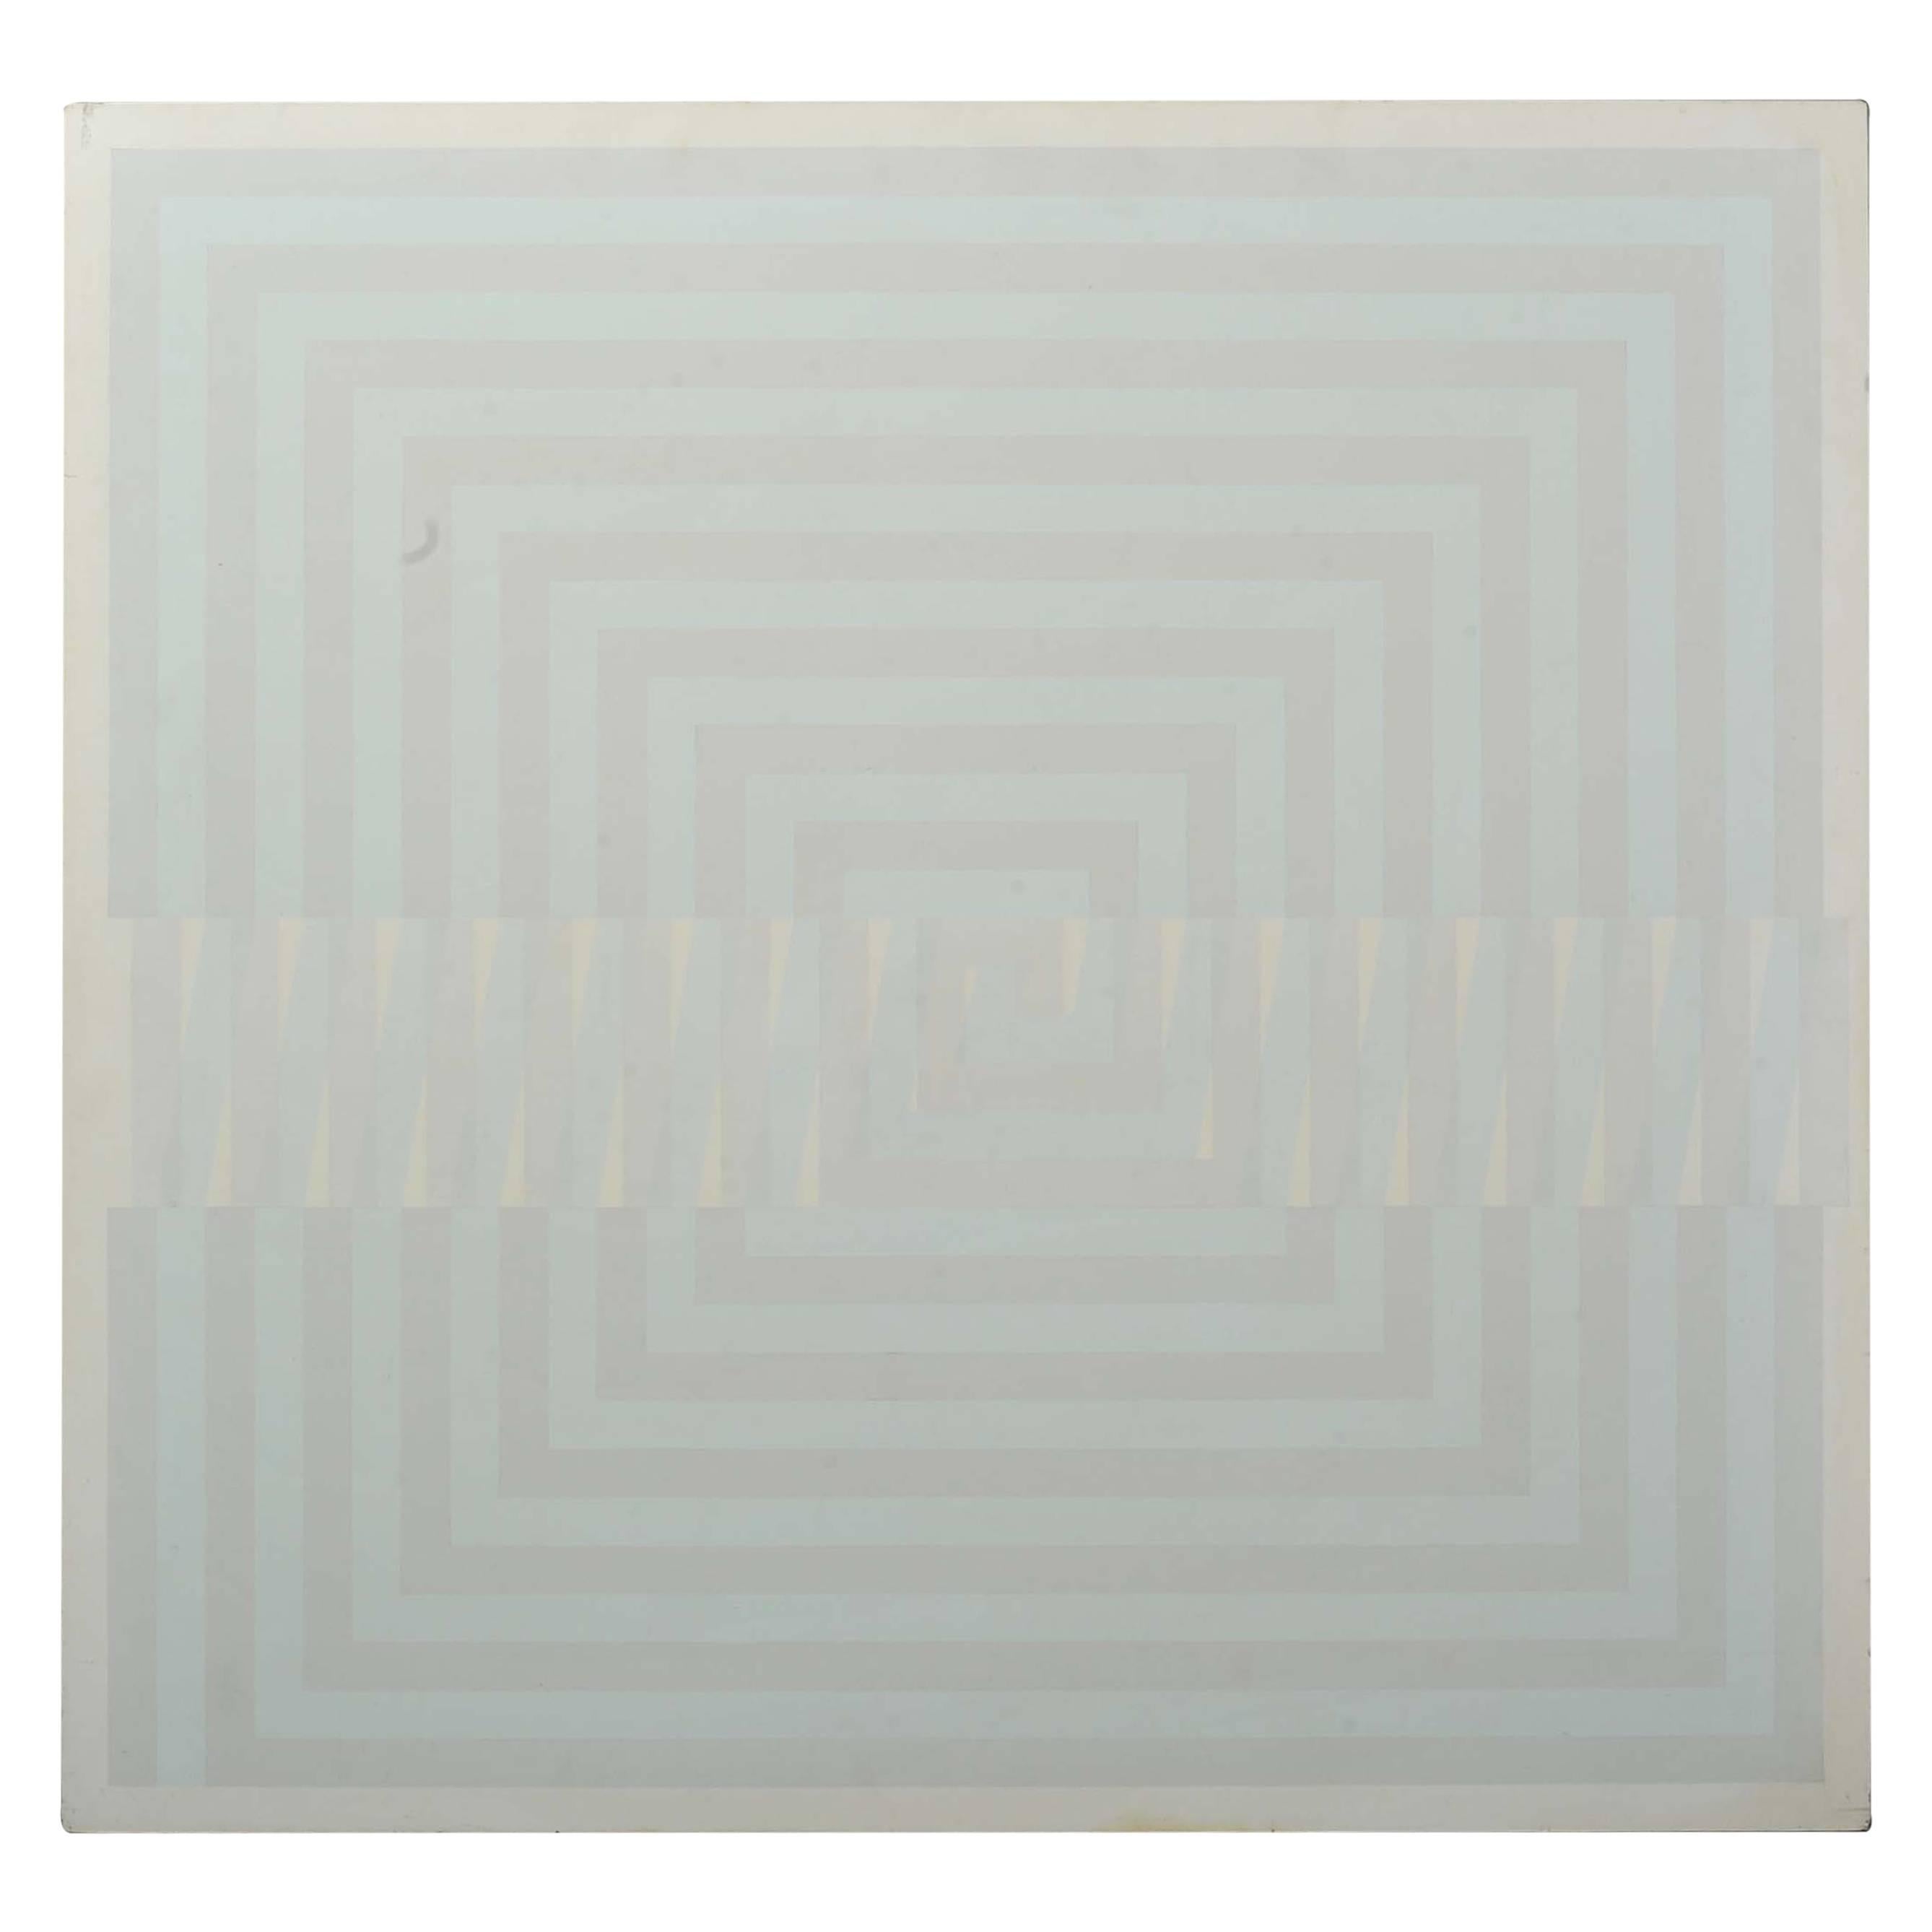 1980's Minimalist Painting in Pastel Tones and White by Majo Joostens